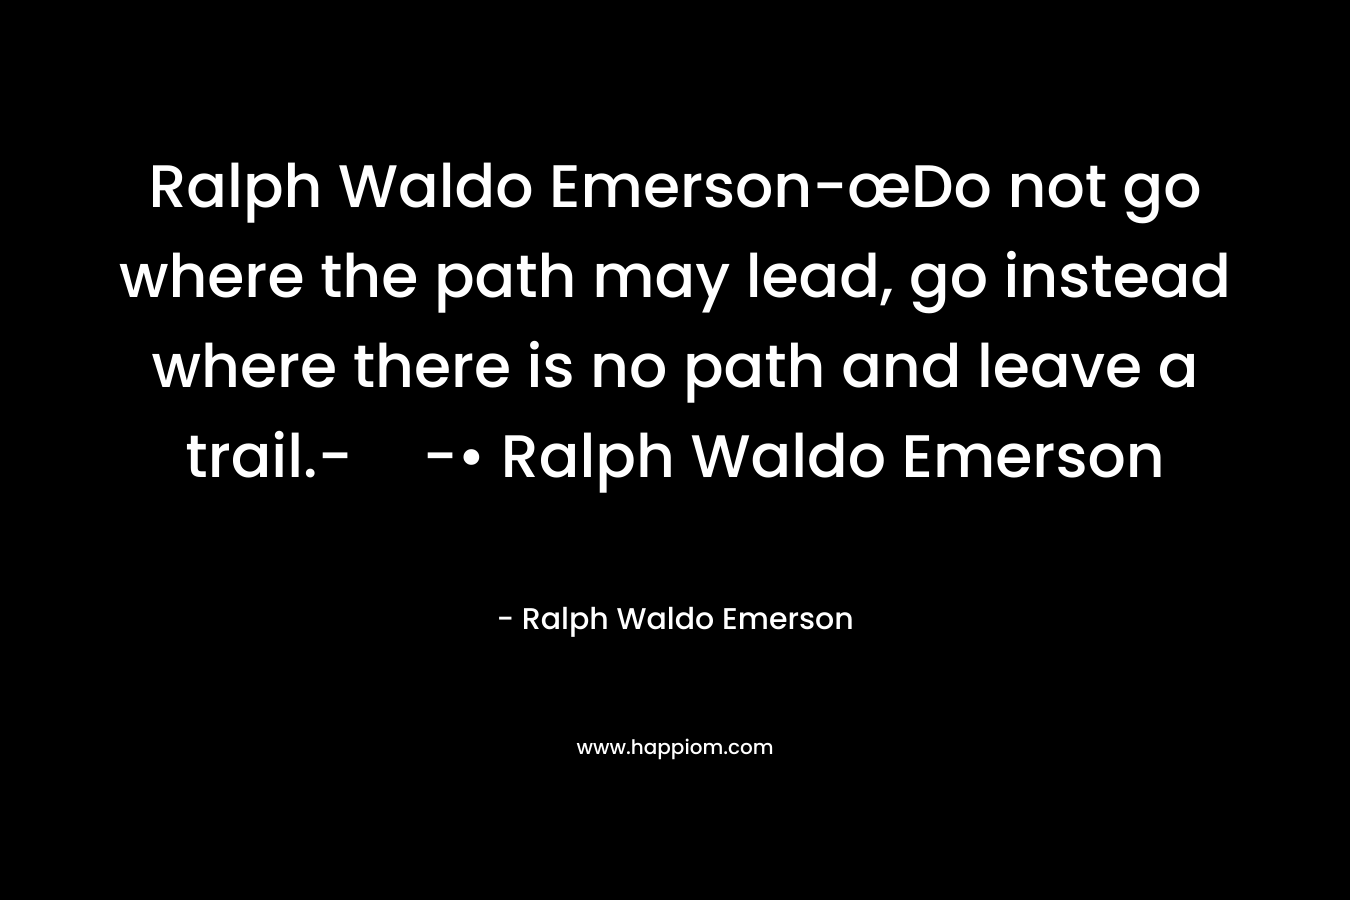 Ralph Waldo Emerson-œDo not go where the path may lead, go instead where there is no path and leave a trail.--• Ralph Waldo Emerson